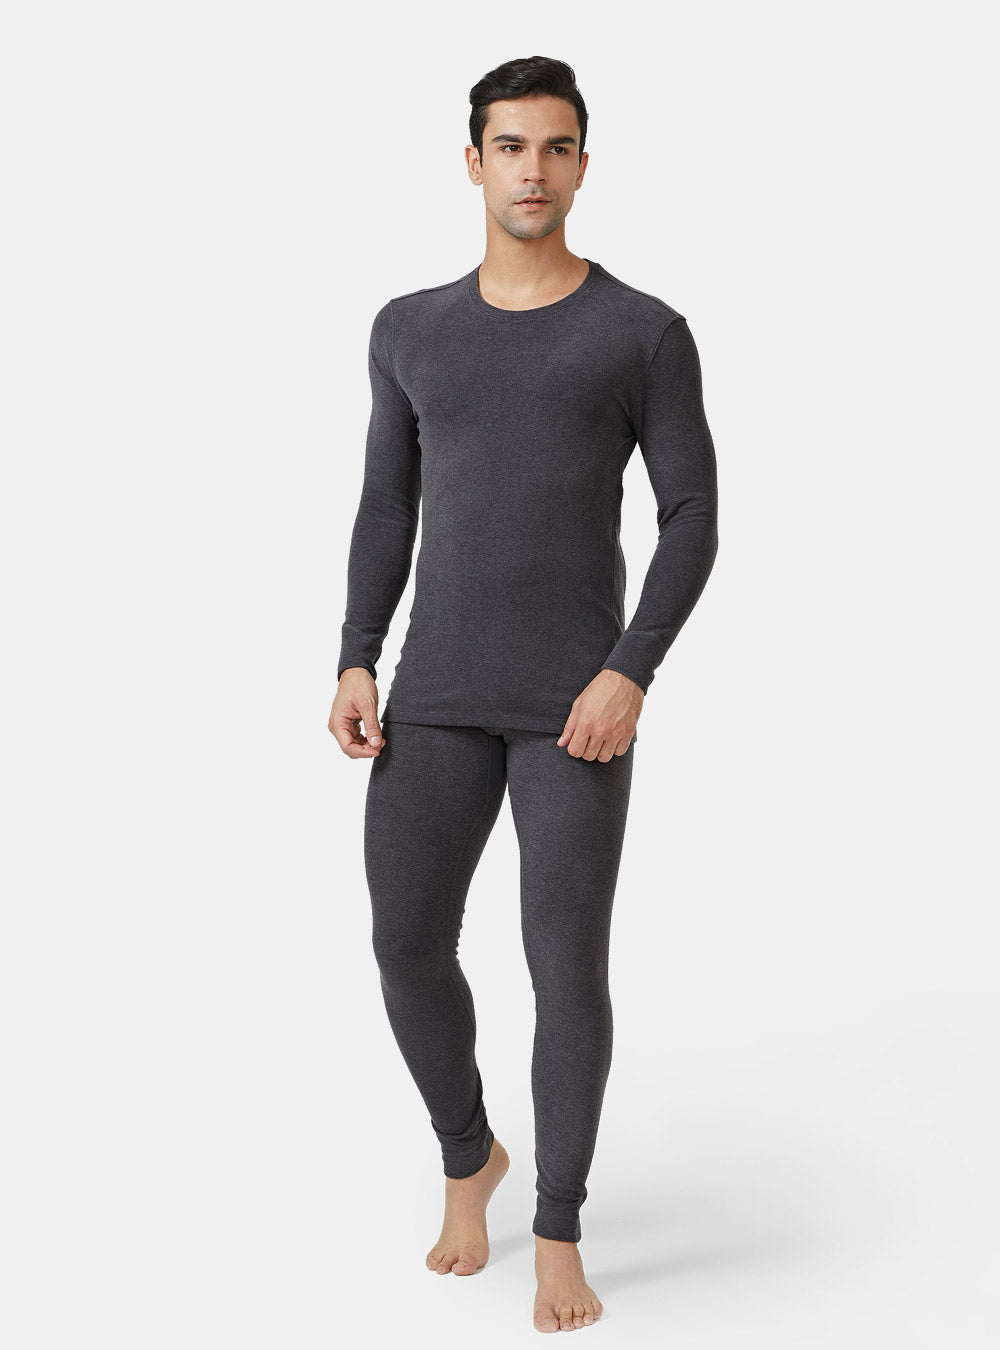 Thermal Underwear Sets For Men Winter Thermo Underwear Long Johns Winter  Clothes